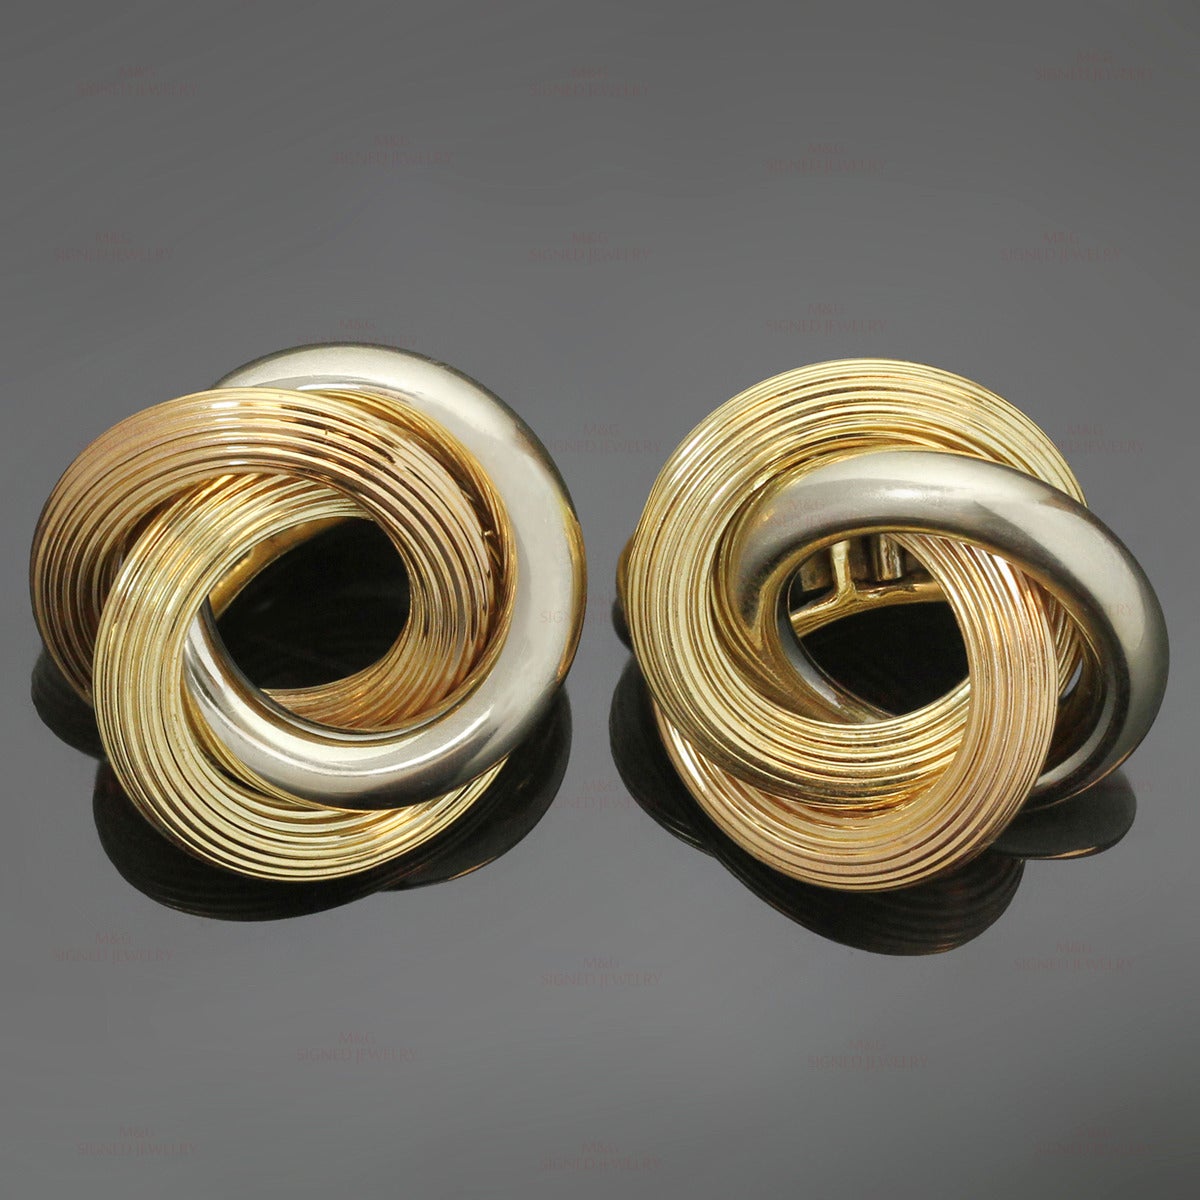 These classic Bvlgari clip-on earrings feature 3 intertwined ridged loops crafted in 18k yellow, white, and rose gold. Made in Italy circa 1950s. Measurements: 1.02